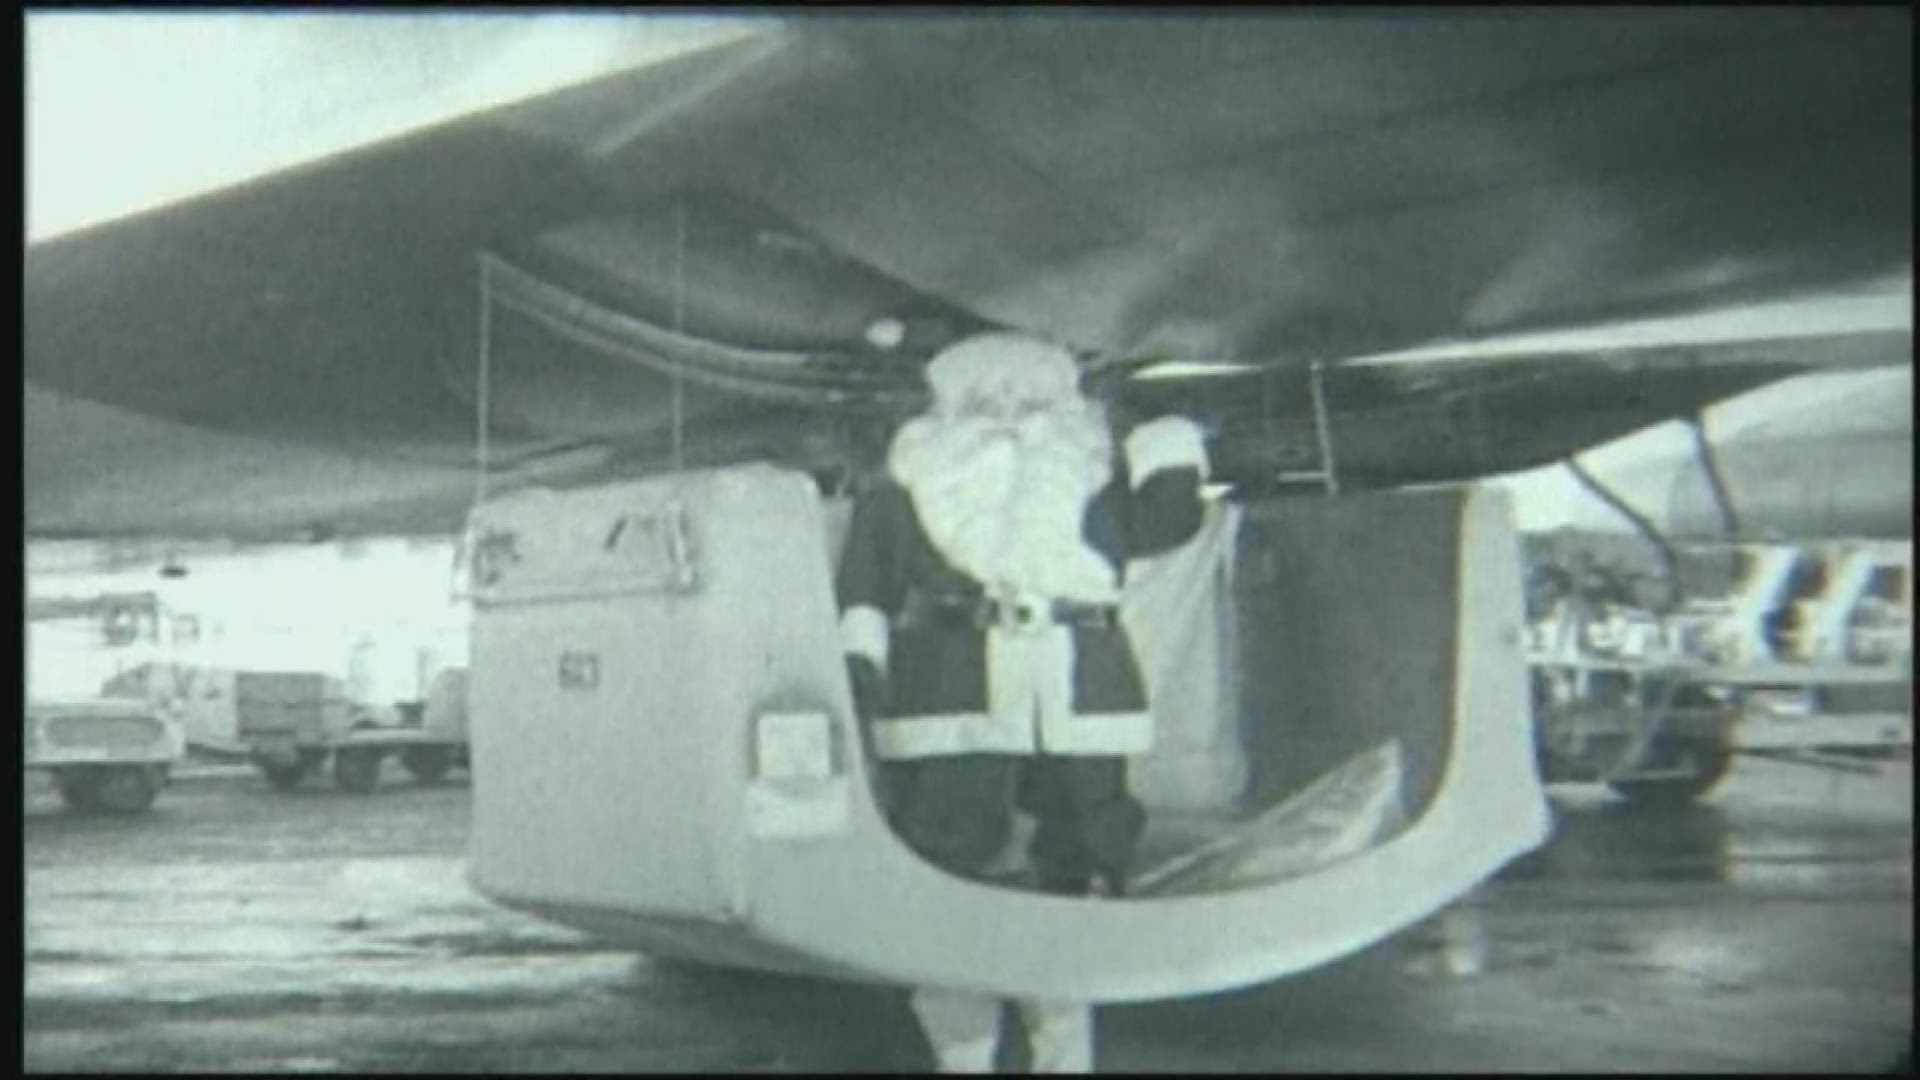 Doug Proffitt goes through the amazing film in WHAS11's archives, snow flurries greeting the crowds in 1958.